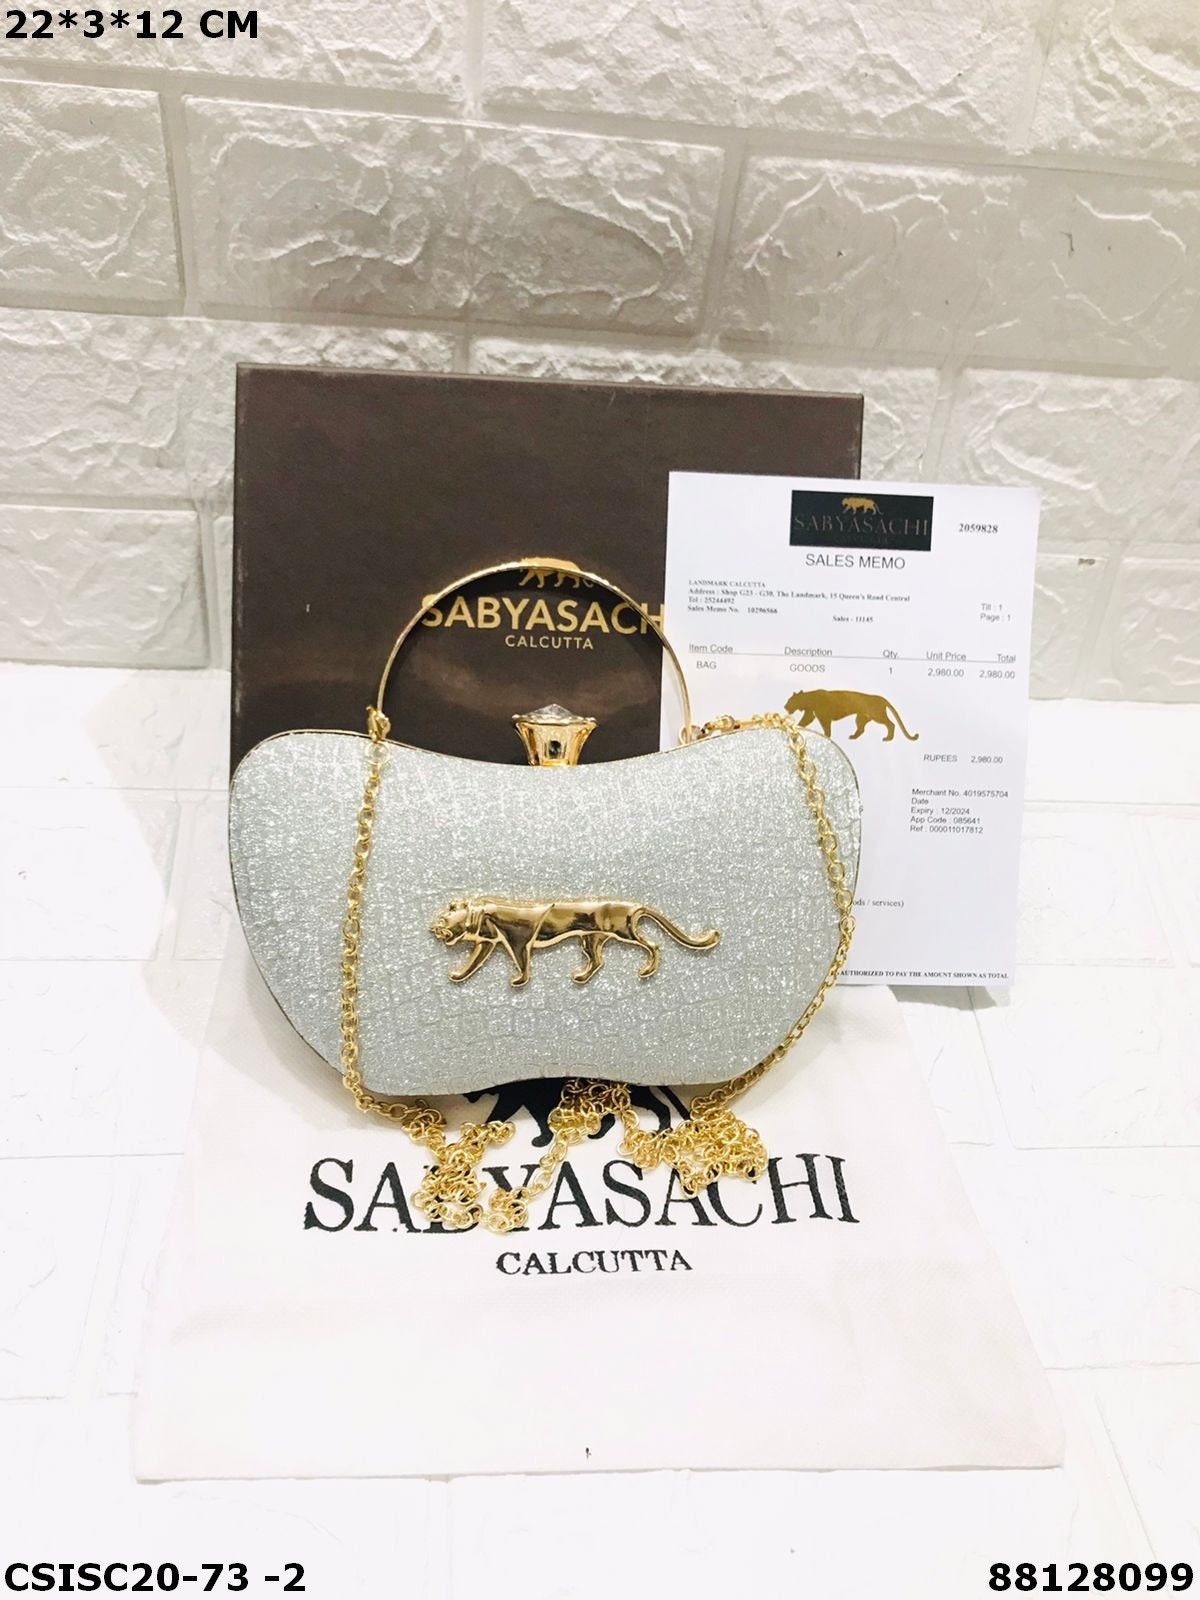 Sabyasachi Inspired Tiger Purse Hand Bag PU Leather Solid Finish With Logo  Design Purse for Women Ladies Evening Party Fancy Stylish Purse - Etsy